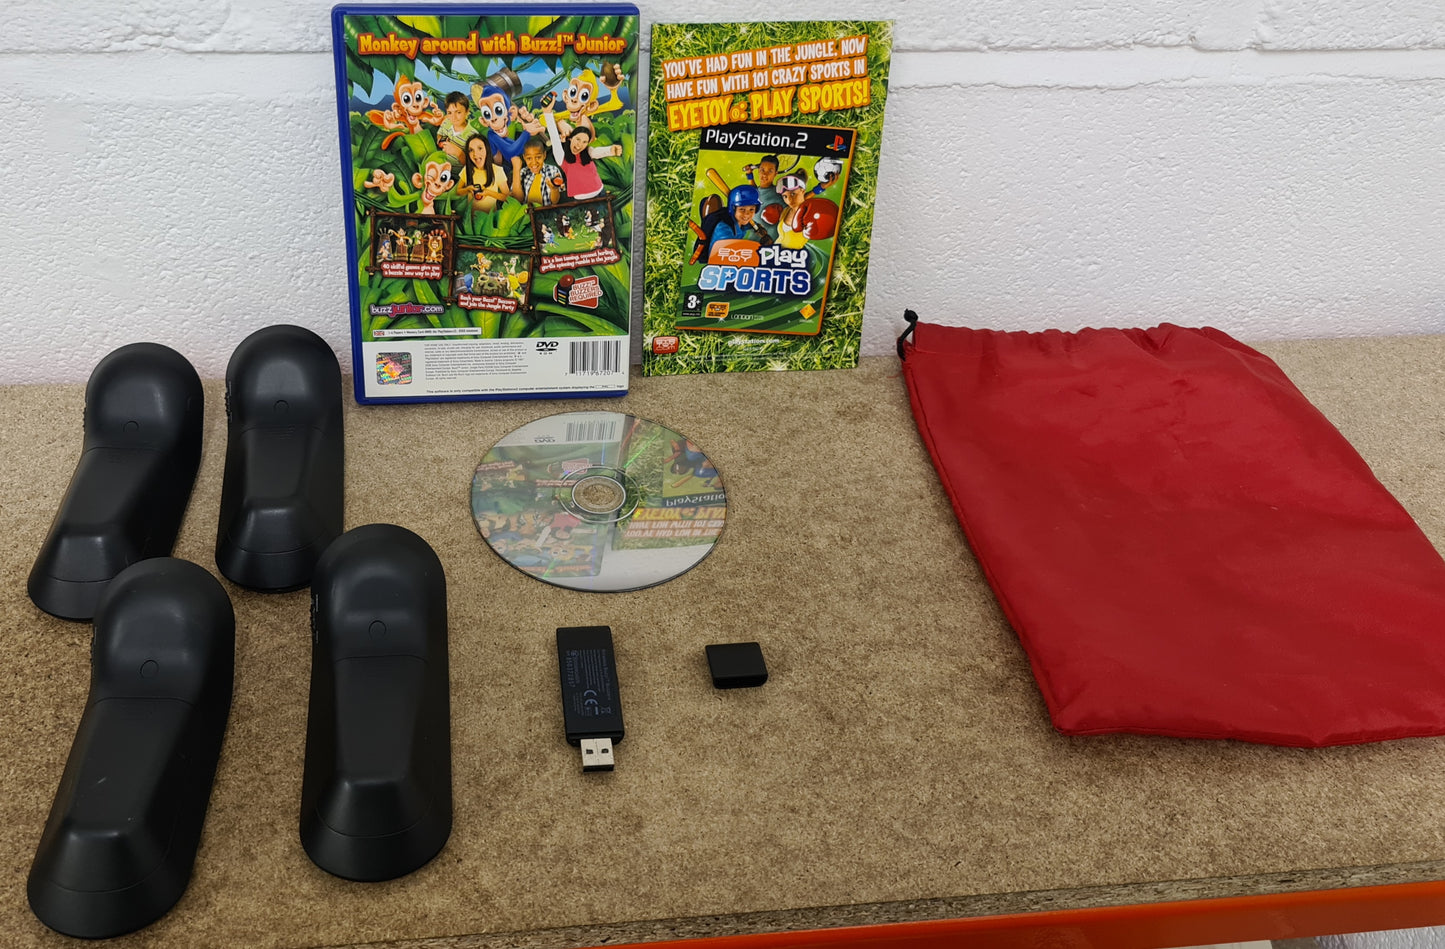 Buzz Junior Jungle Party with Wireless Buzz Controllers Sony Playstation 2 (PS2) Game & Accessory